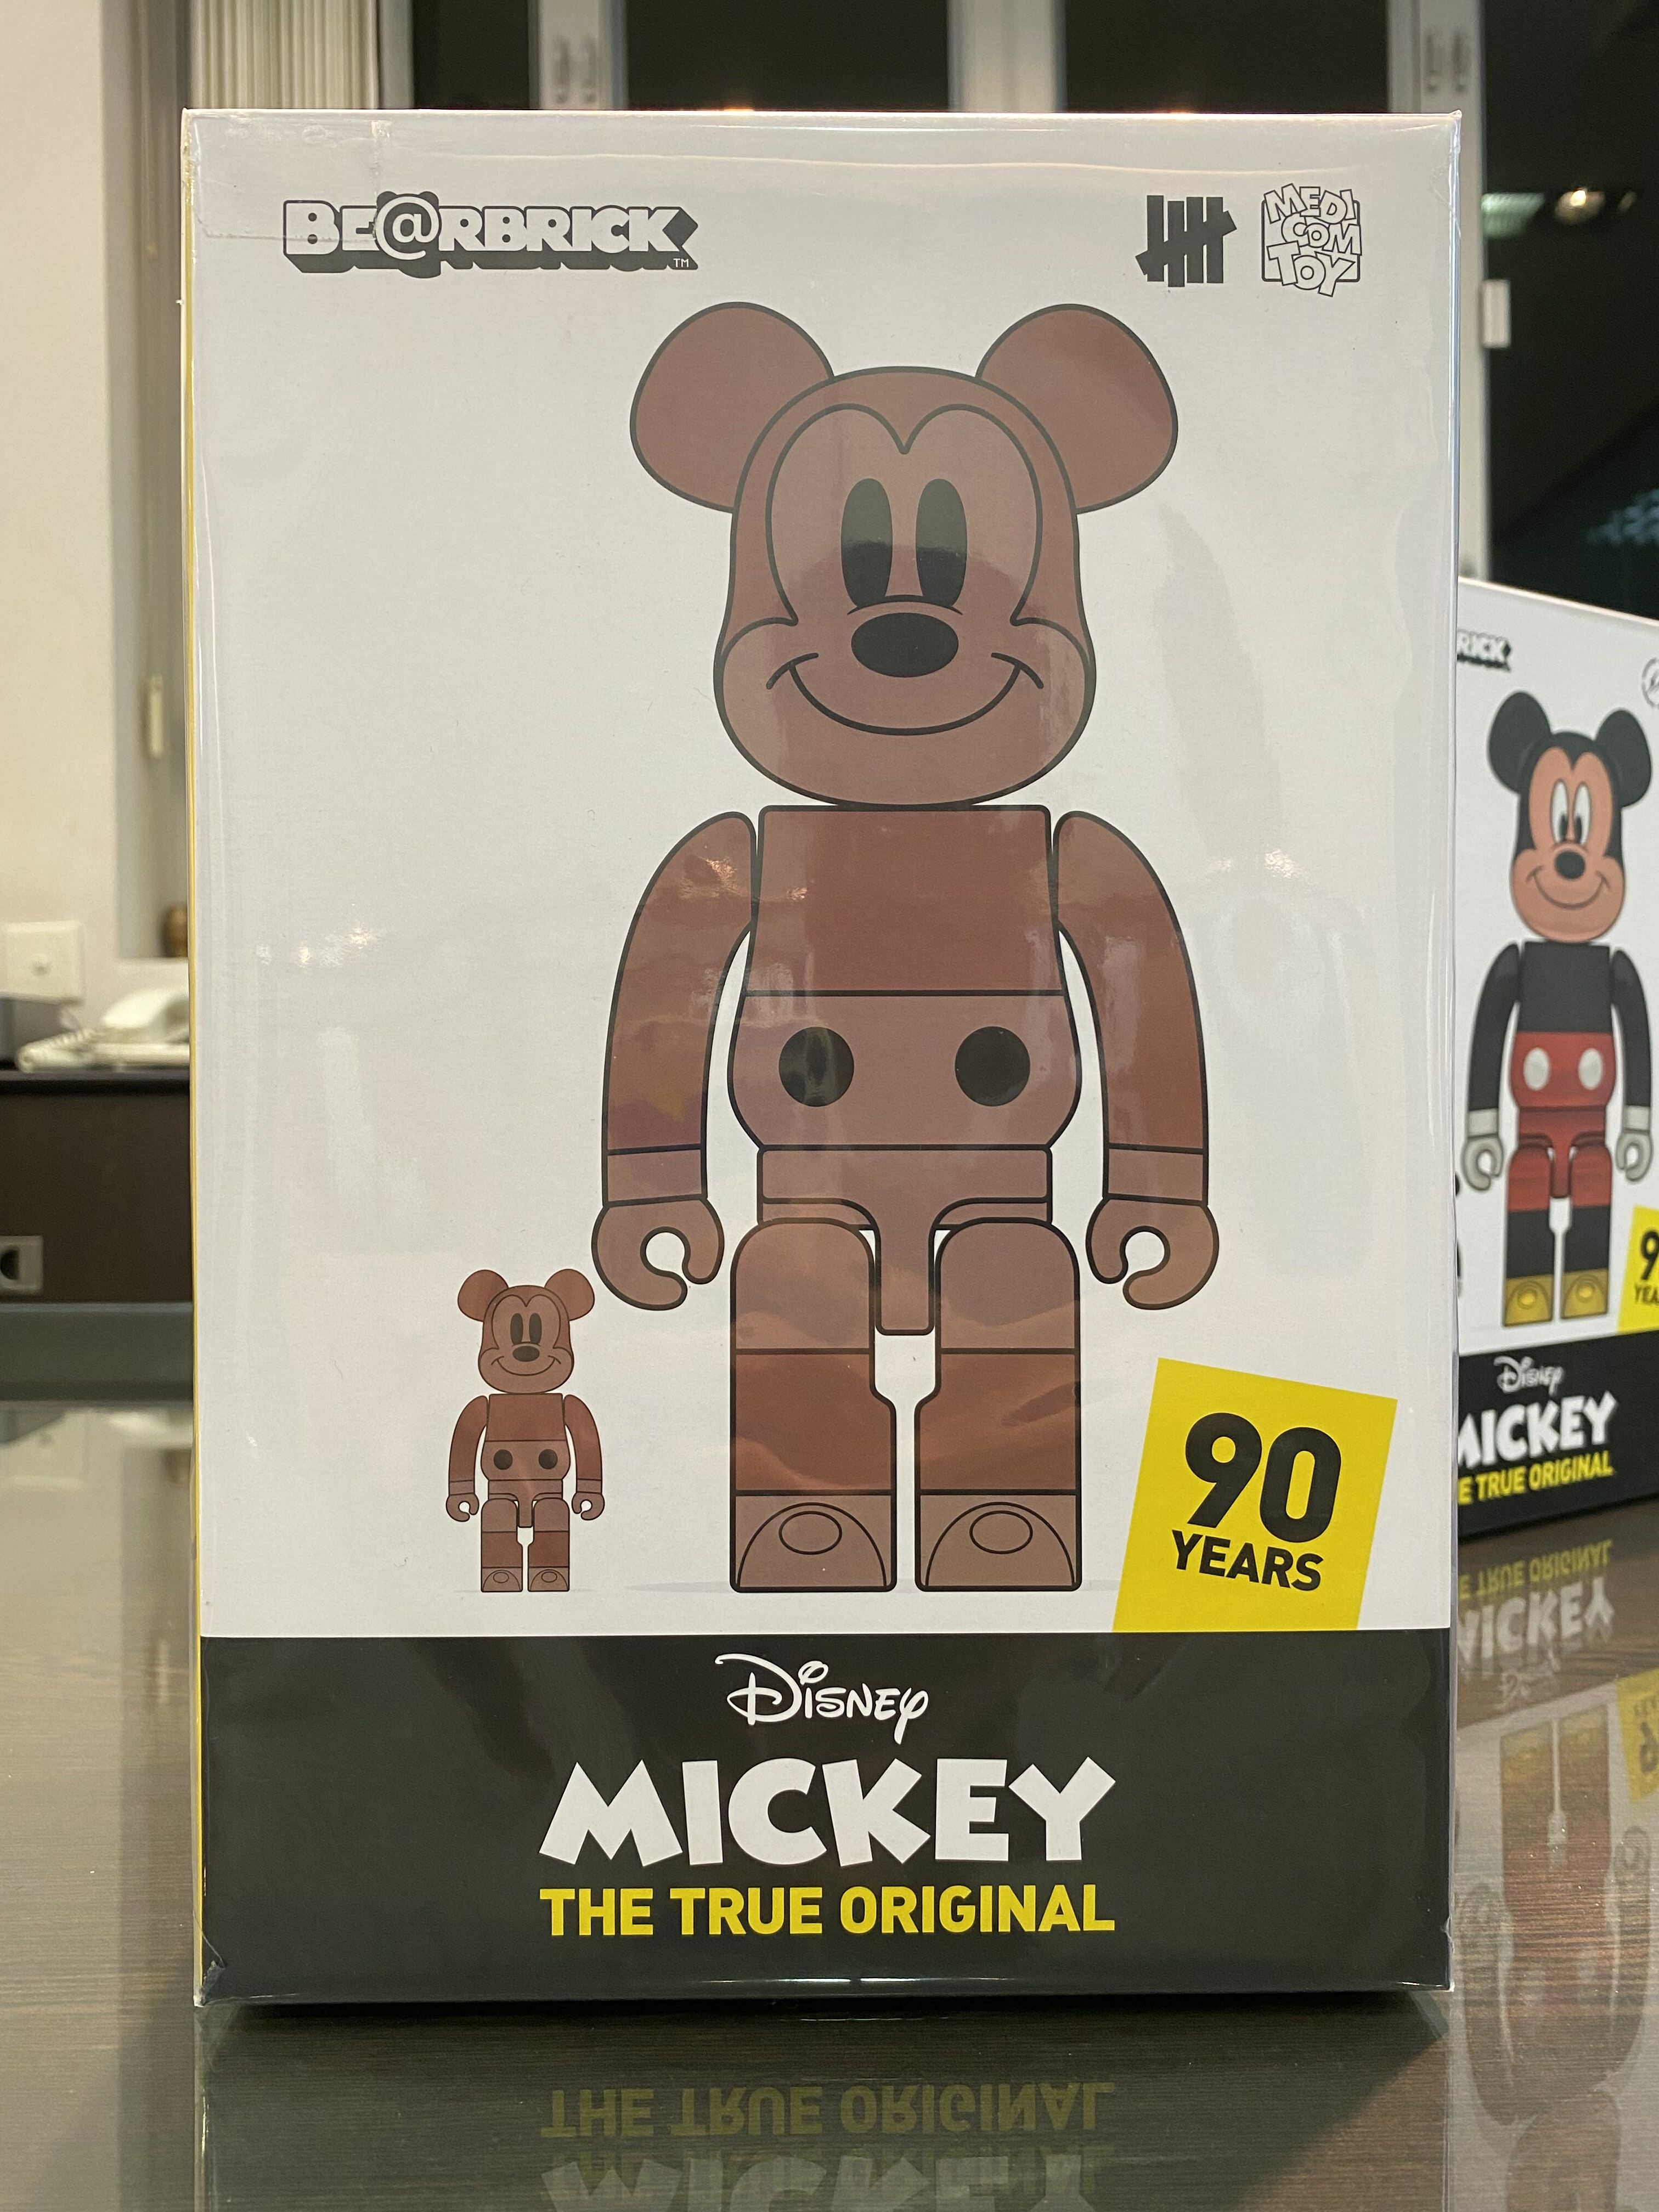 MEDICOM TOY - BE@RBRICK UNDEFEATED MICKEY MOUSE 1000%の+stbp.com.br